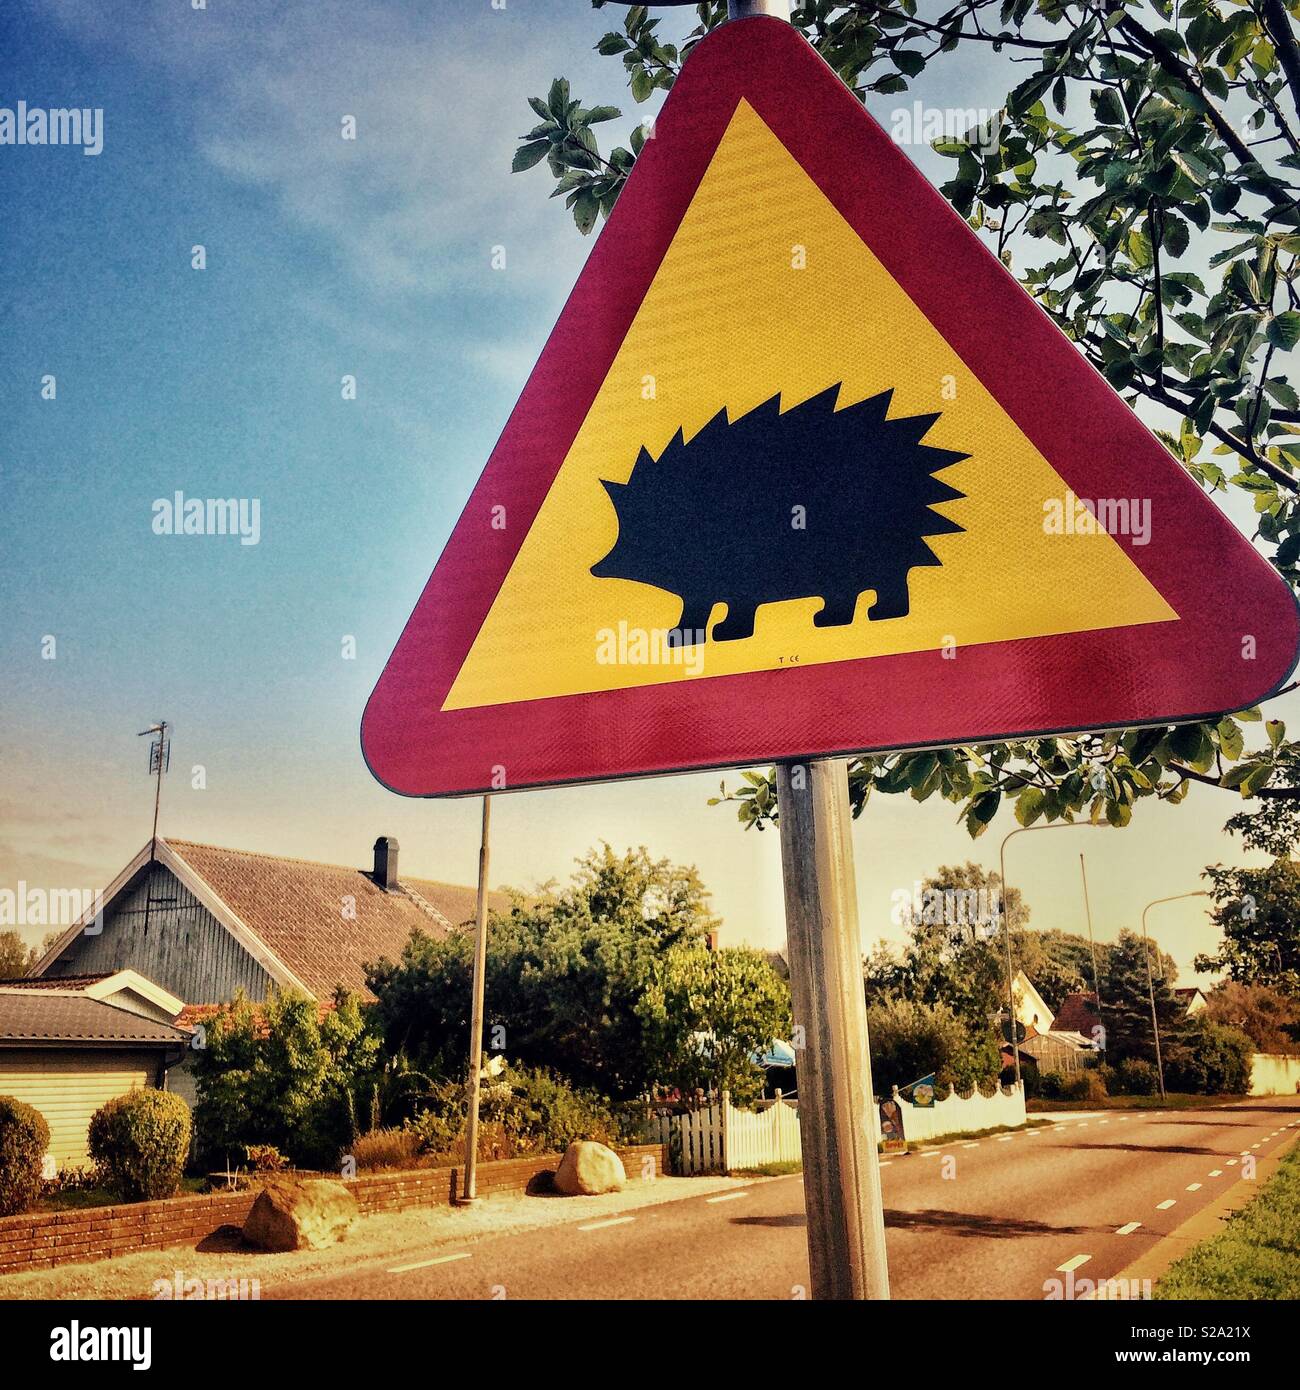 Hedgehog crossing - a road warning sign for crossing hedgehogs in suburbia - hedgehog safety warning speed limit sign Stock Photo